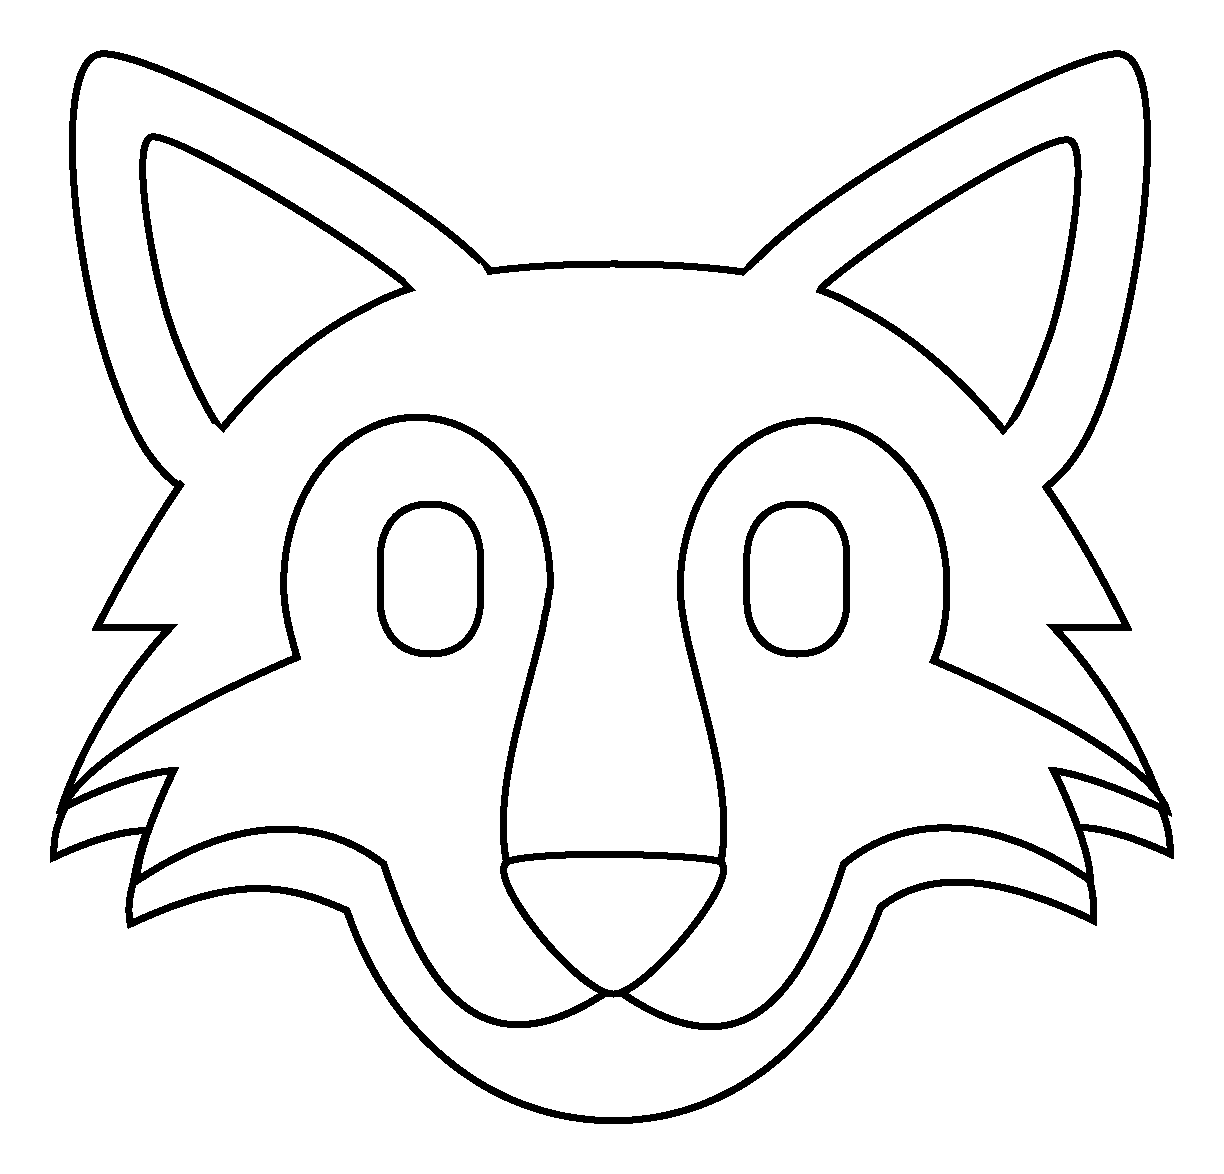 Wolf Face Emoji coloring page - ColouringPages